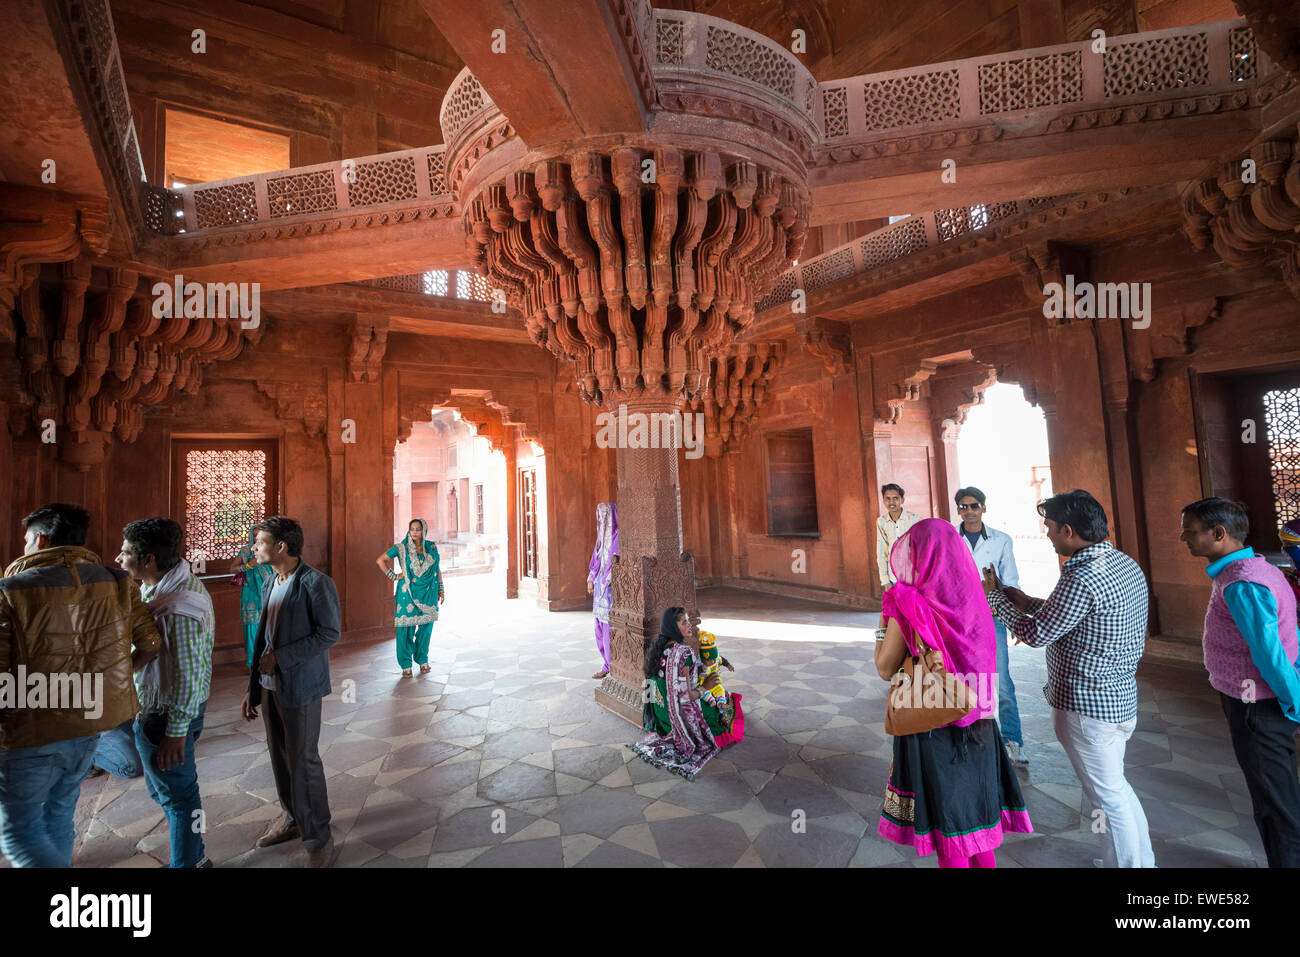 Indians sightseeing at the abandoned city of Fatehpur Sikri in Uttar Pradesh, India Stock Photo